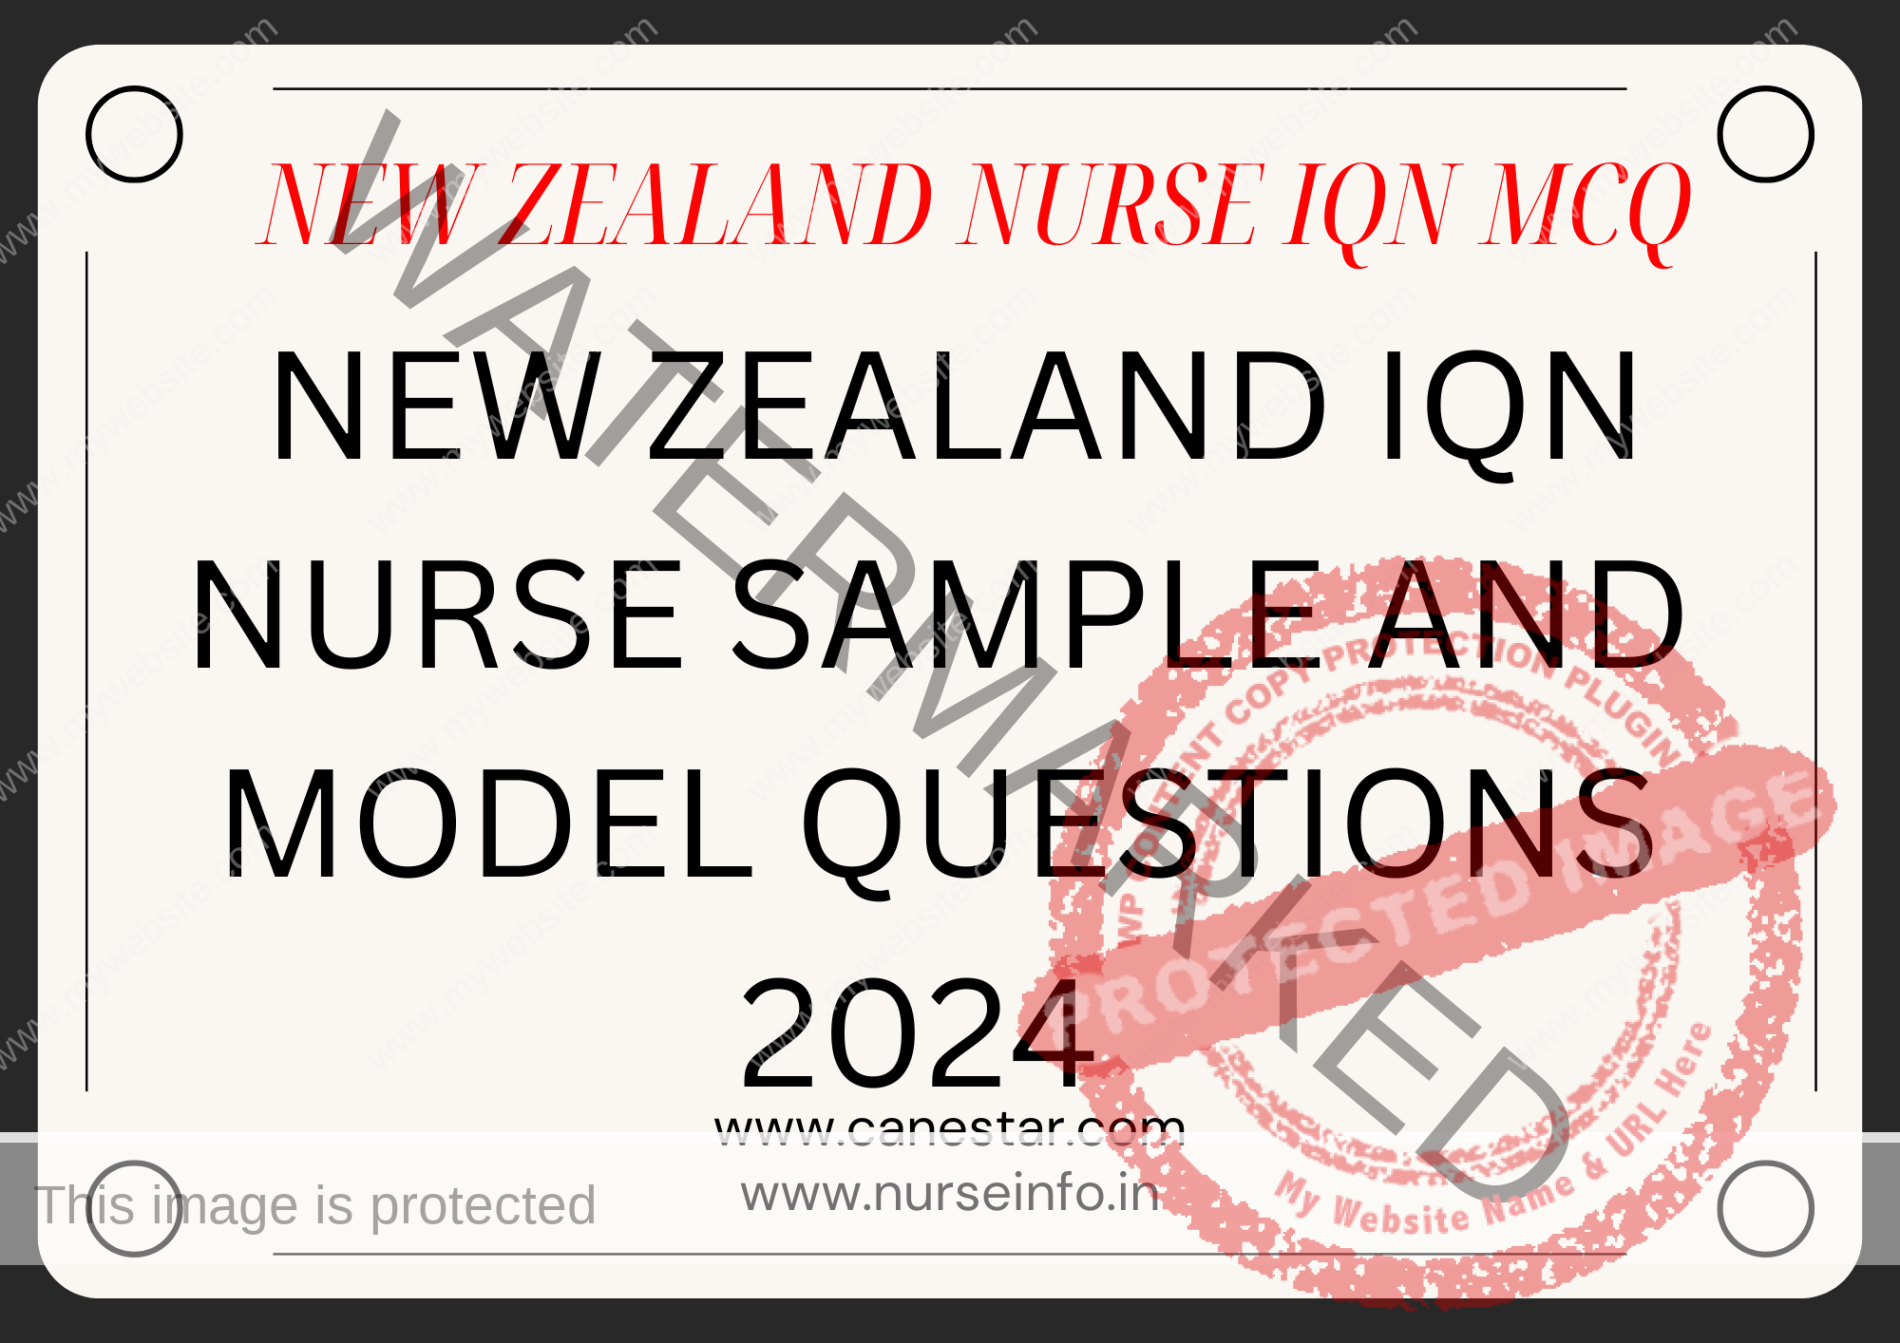 NEW ZEALAND NURSE IQN MCQ SAMPLE AND MODEL QUESTIONS